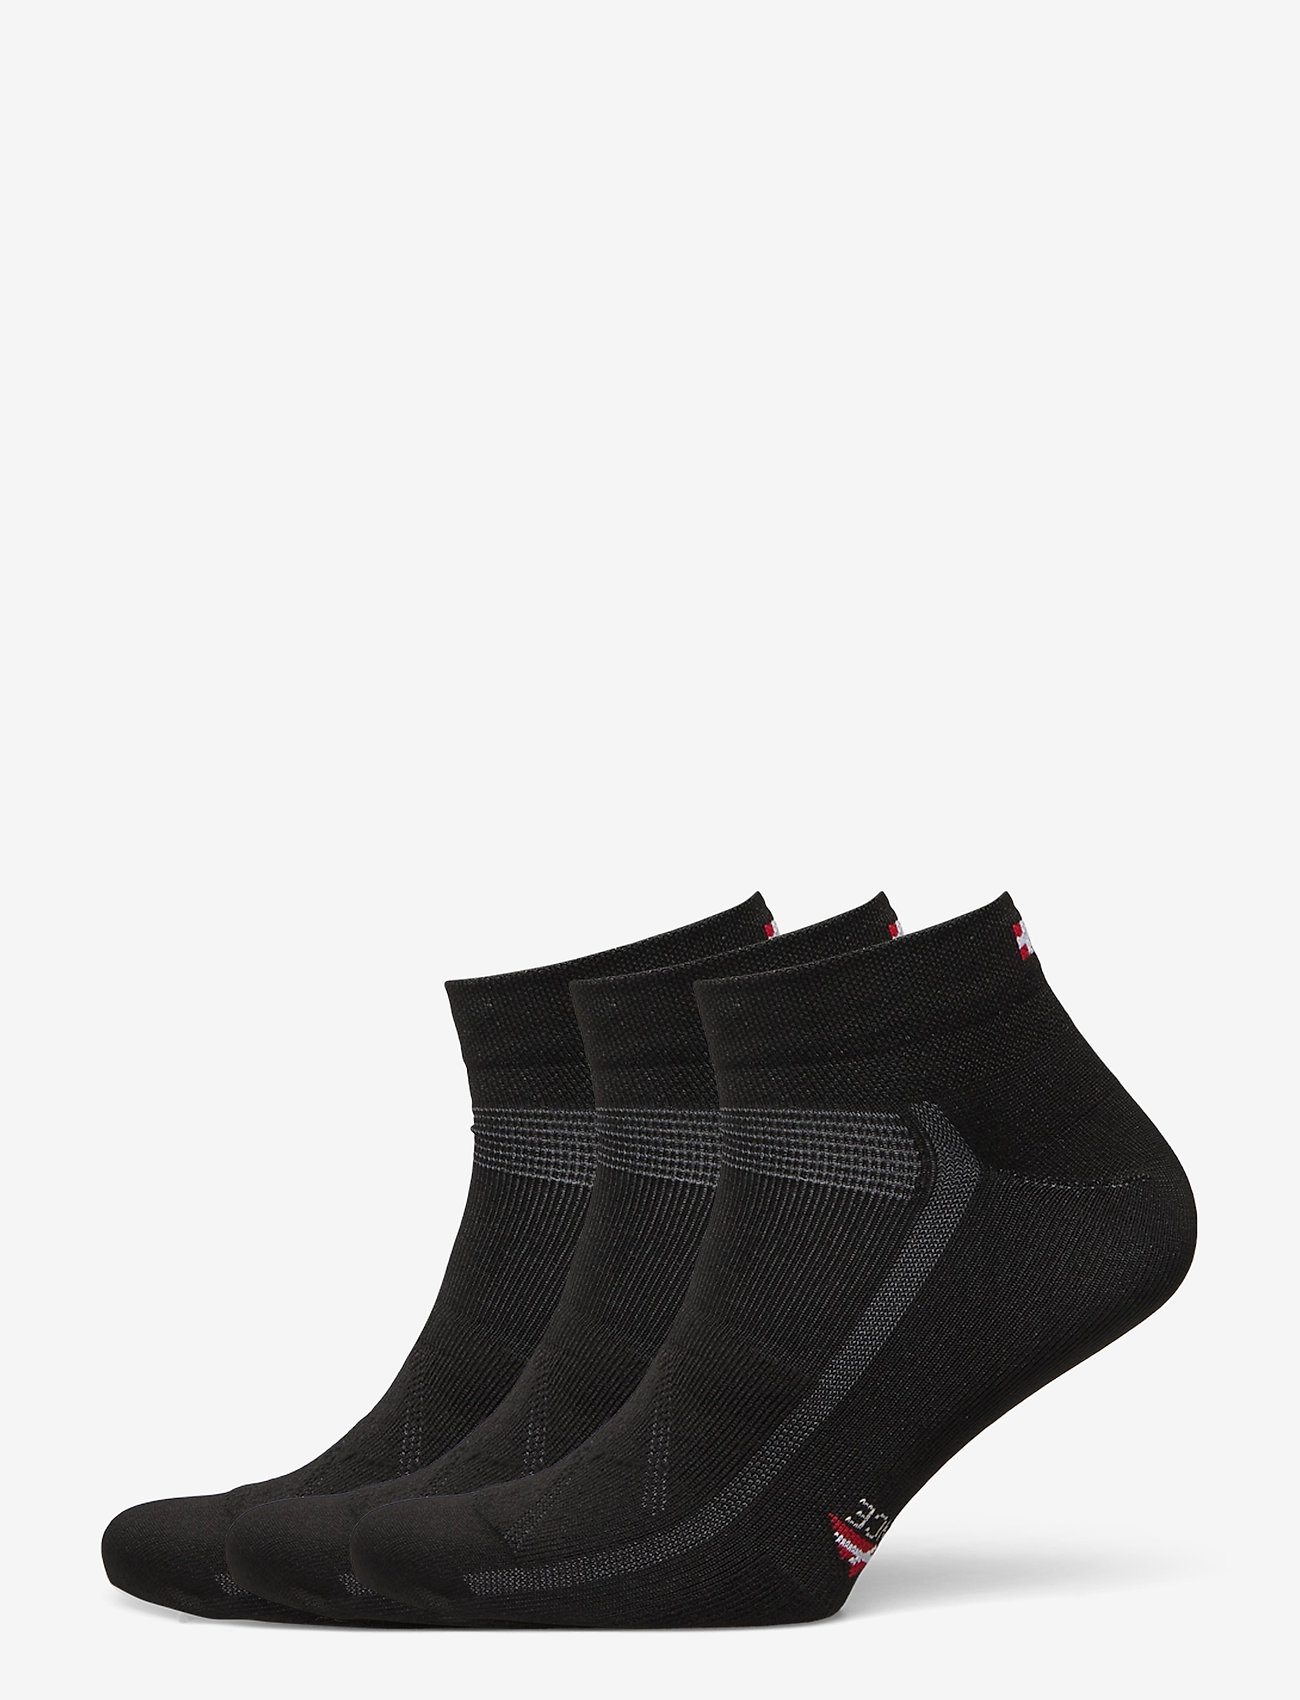 Danish Endurance - Low Cut Cycling Socks 3 Pack - lowest prices - black - 0